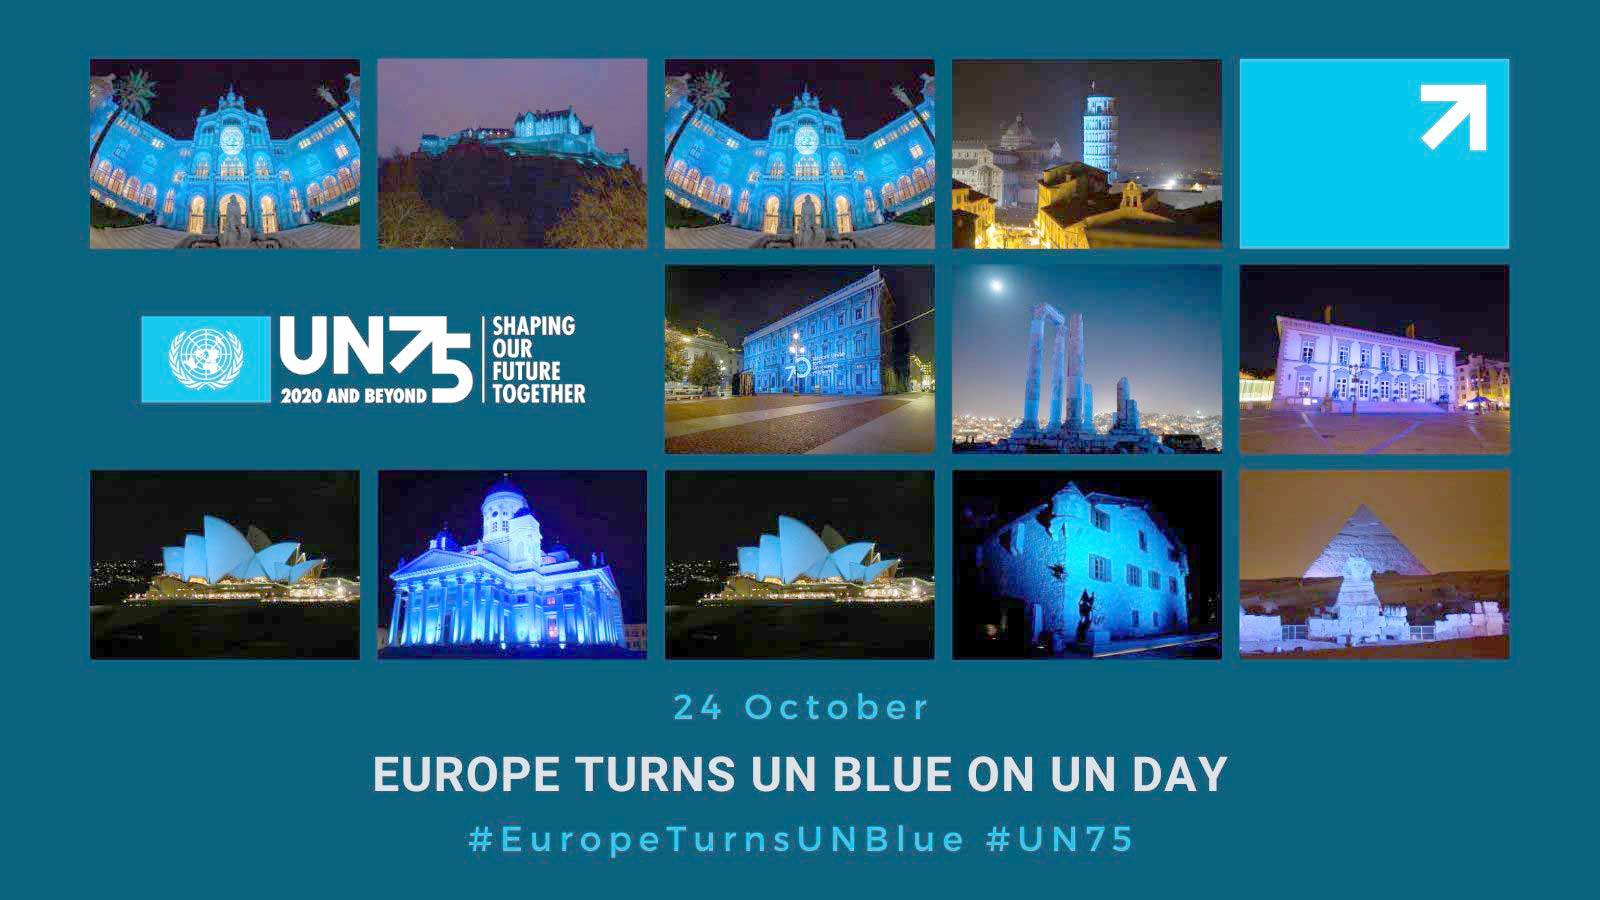 Images of emblematic buildings around the world lit up in blue light.